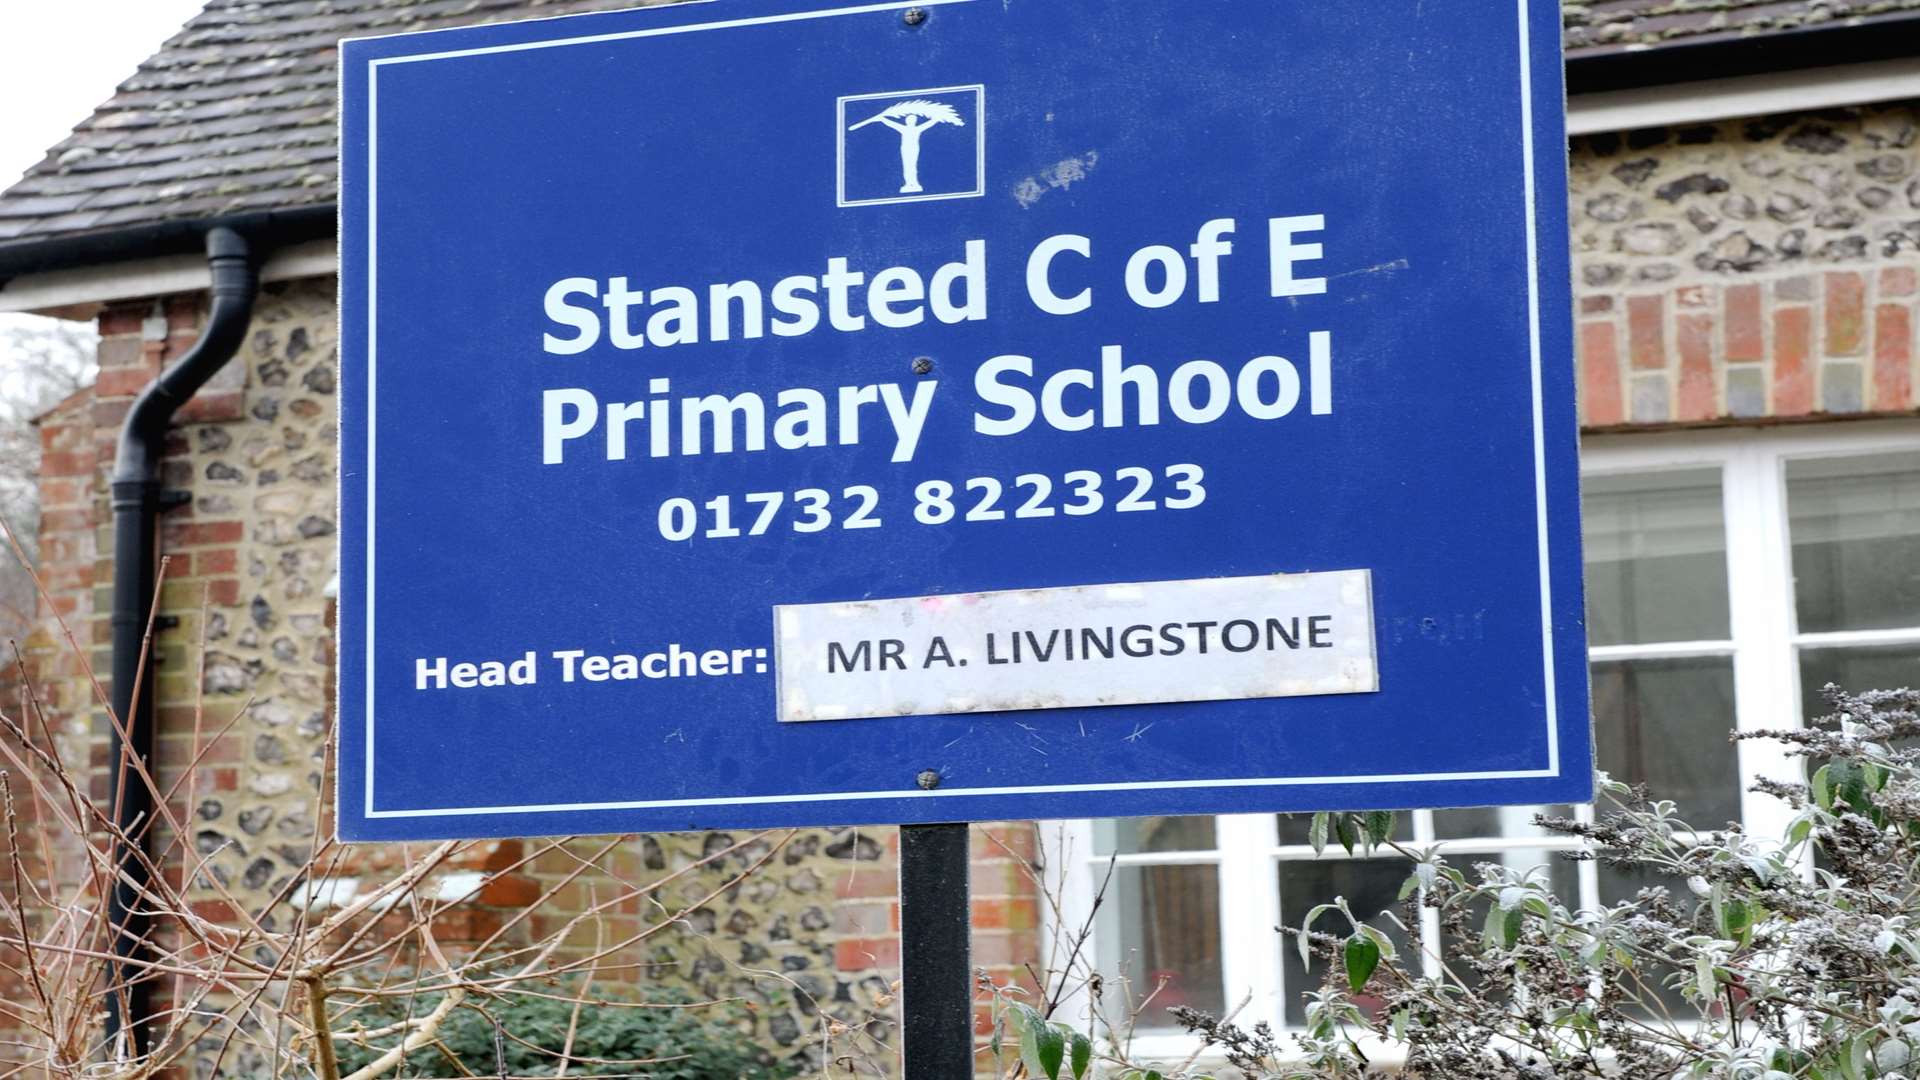 The school is facing closure after falling pupil numbers